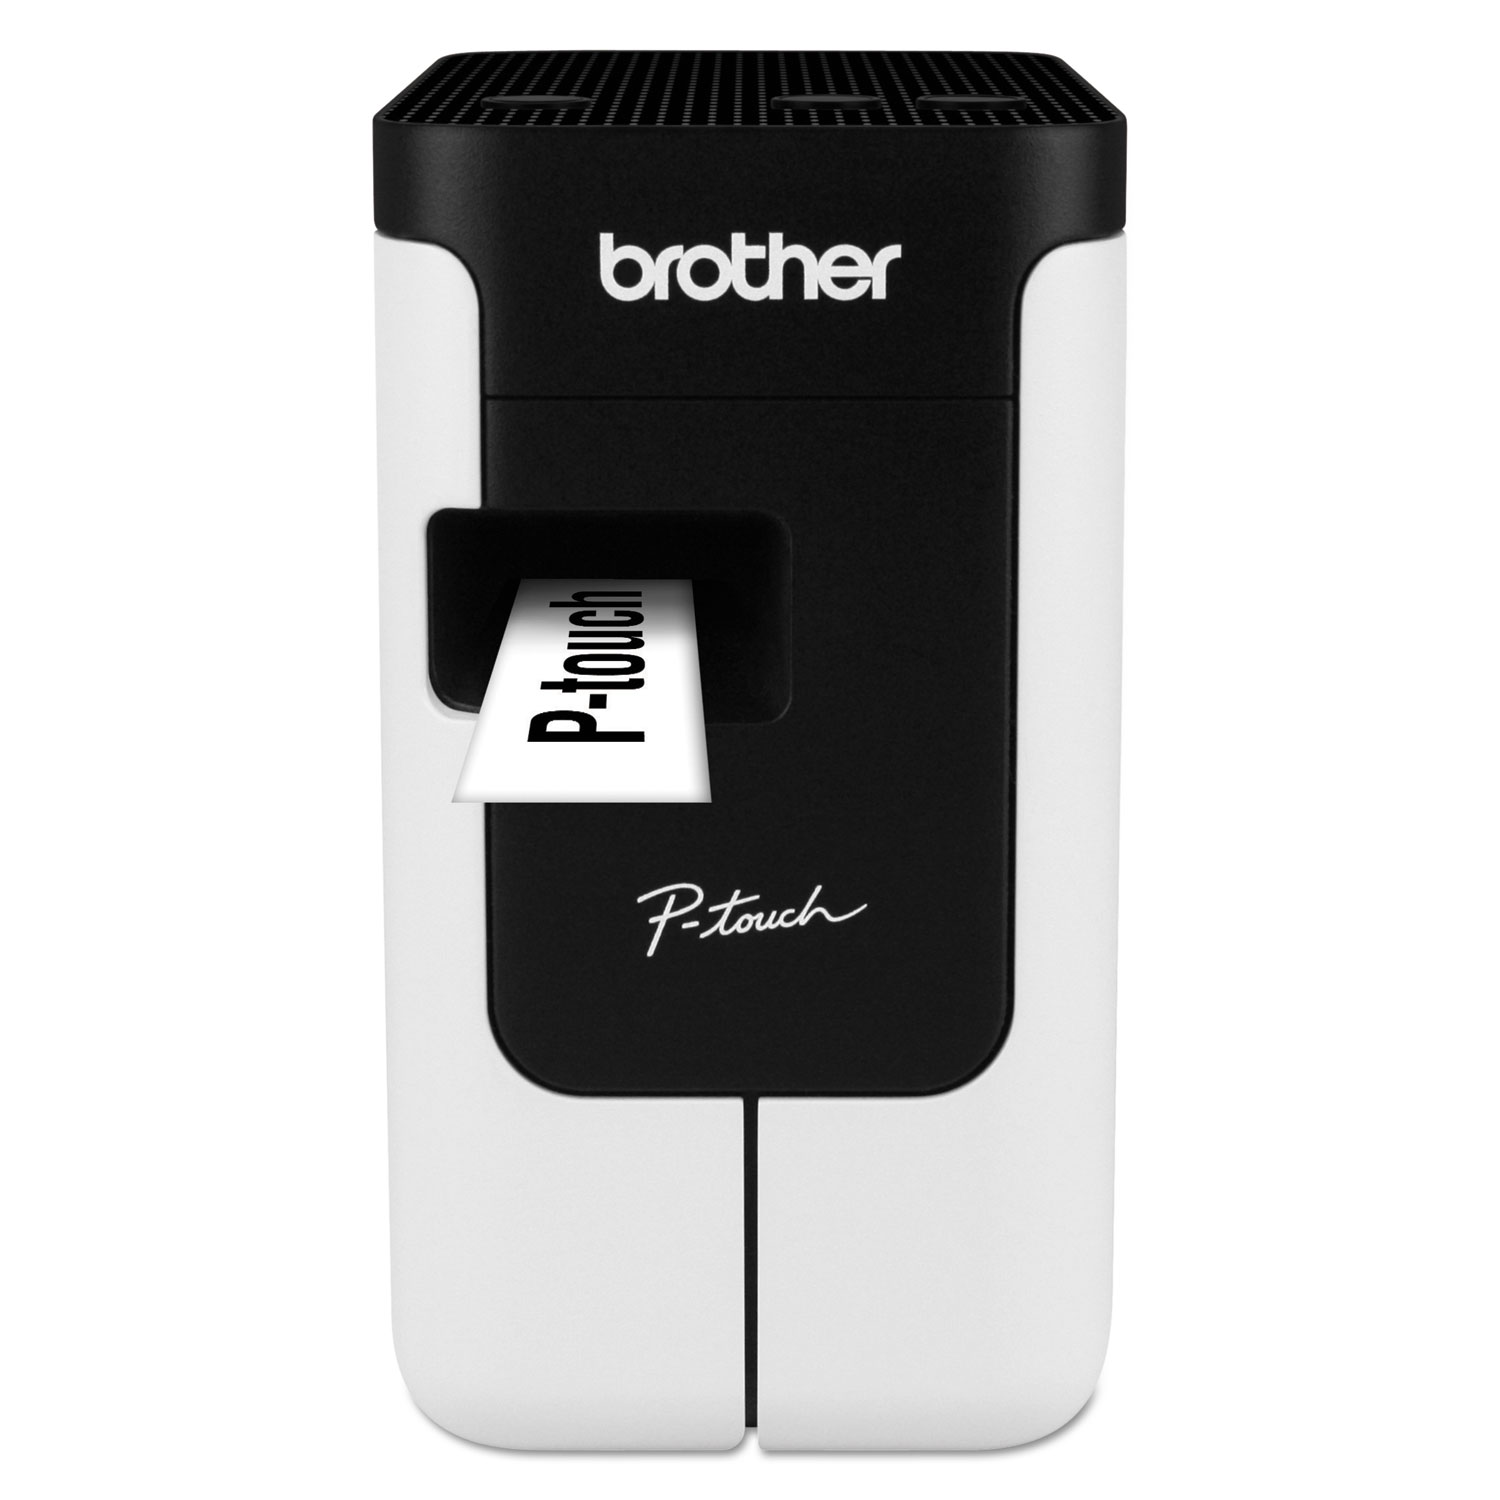  Brother P-Touch PTP700 PTP700 PC-Connectable Label Printer for PC and Mac (BRTPTP700) 